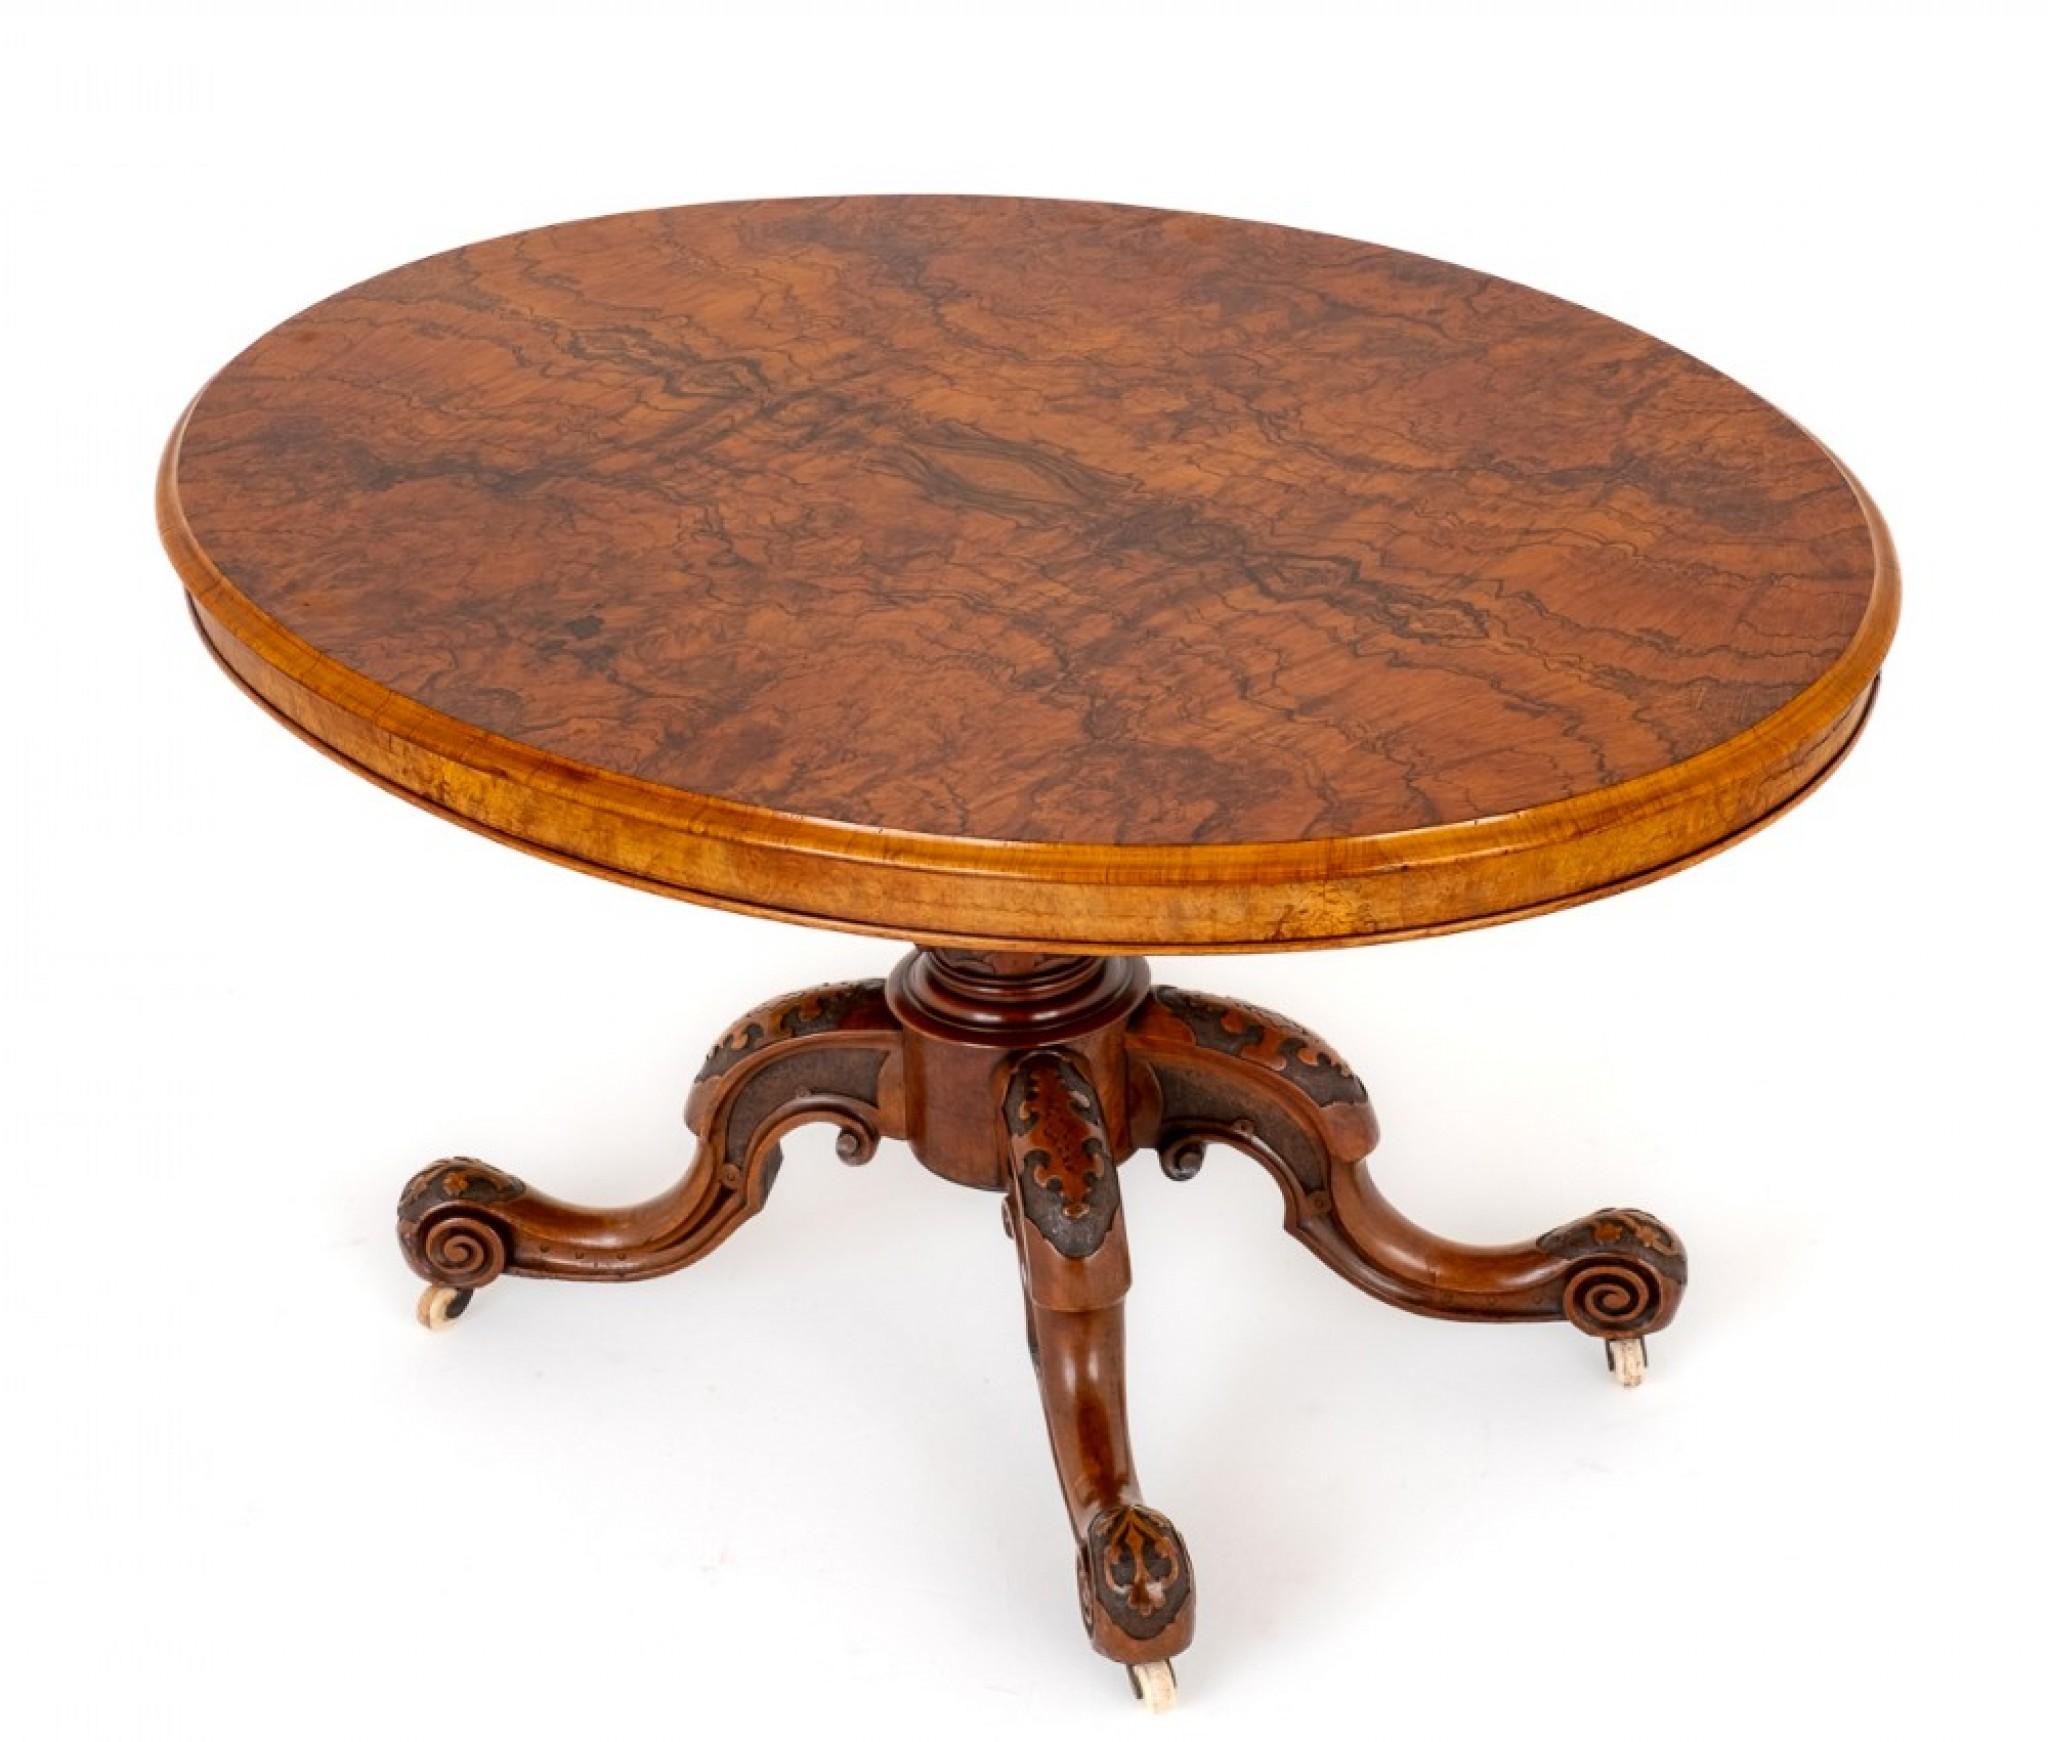 Excellent quality victorian burr walnut centre table.
The Oval Top of this Table Featuring the Most Wonderful Matched Burr Walnut Veneers.
circa 1860
The Table is Raised Upon 4 Shaped and Carved Legs with Porcelain Castors and a Shaped and Carved